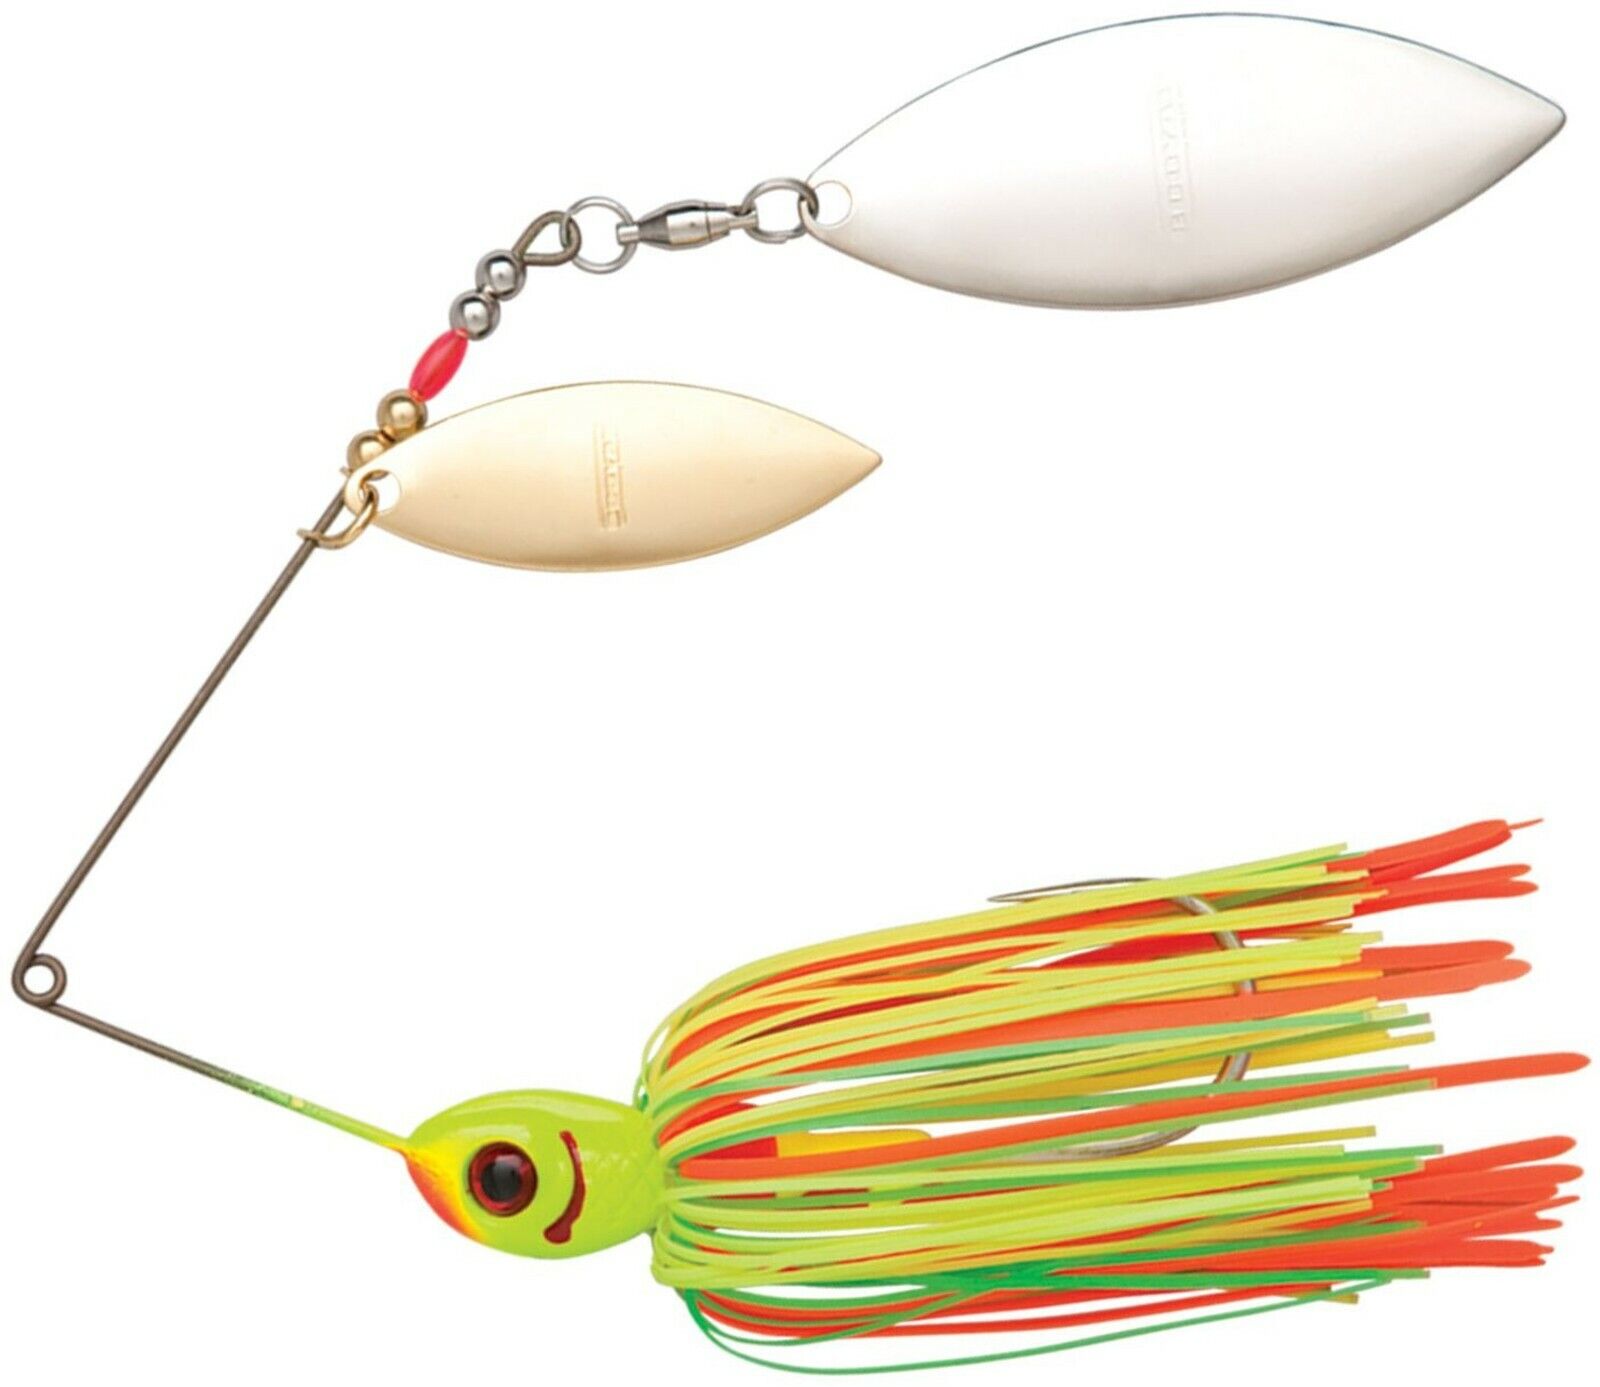 Booyah Pikee 1/2oz Double Willow Spinnerbait w/ Steel Leader